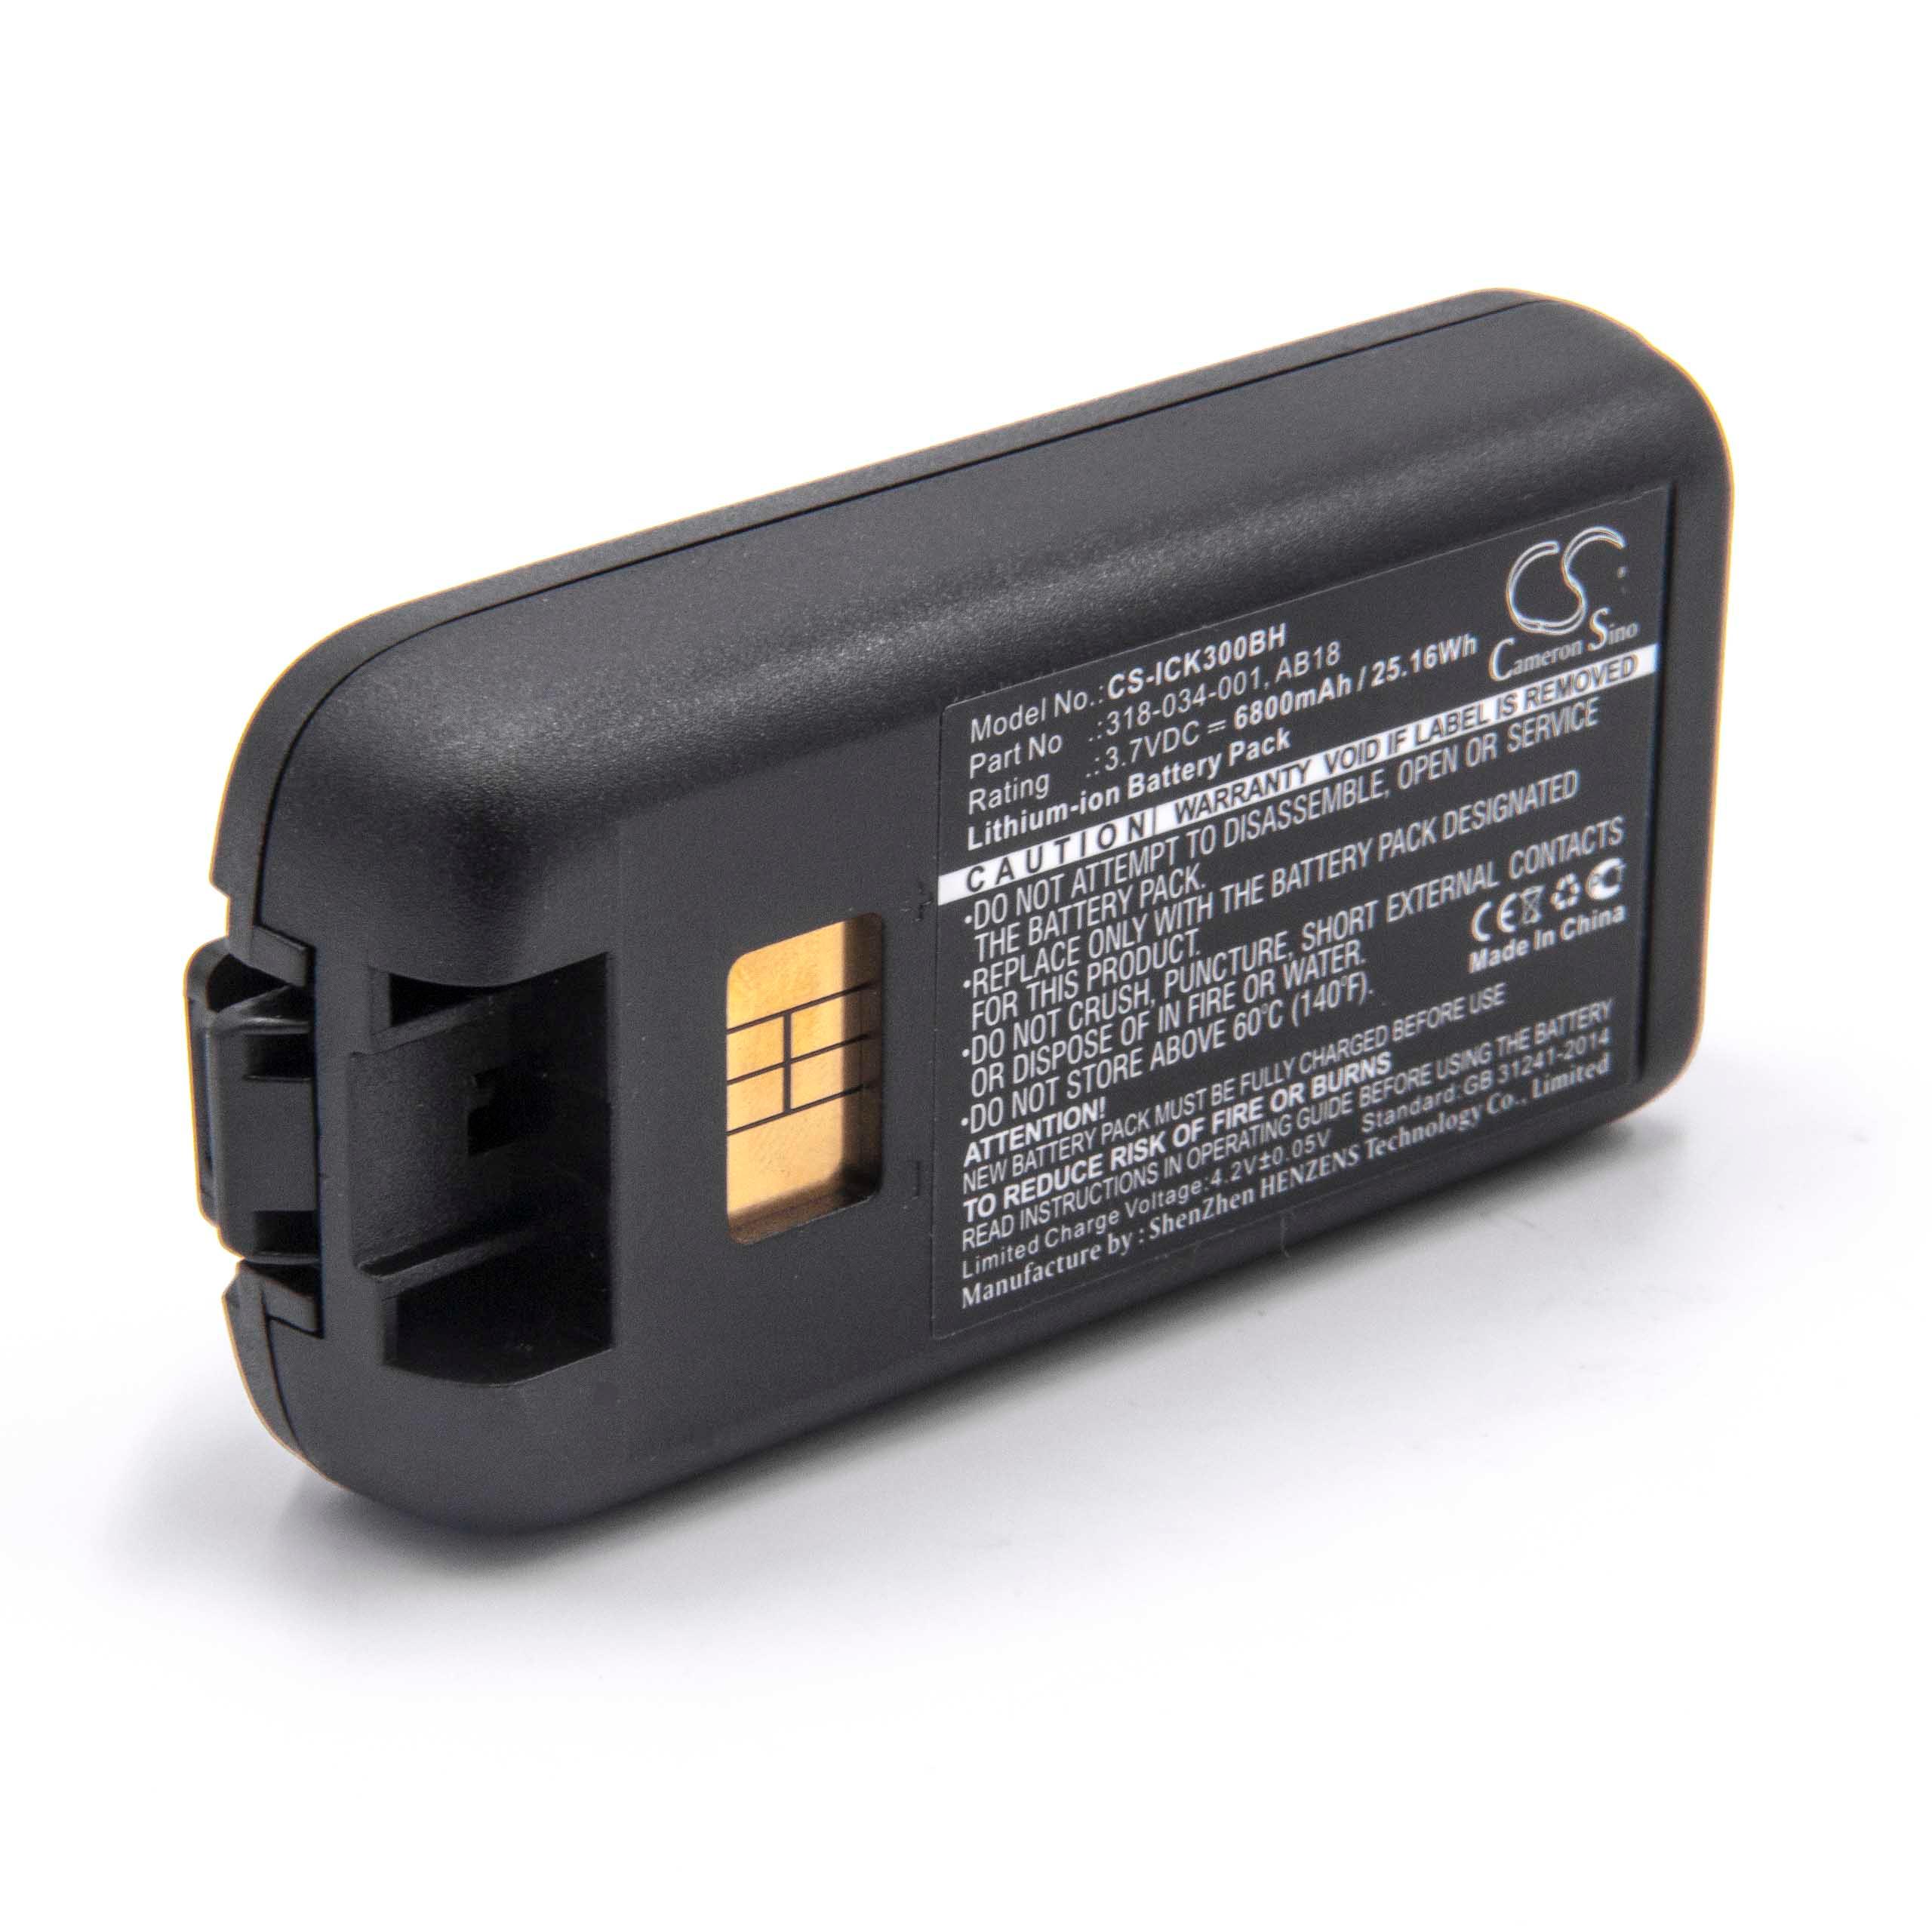 Barcode Scanner POS Battery Replacement for Intermec 318-033-021, 318-033-001 - 6800mAh 3.7V Li-Ion